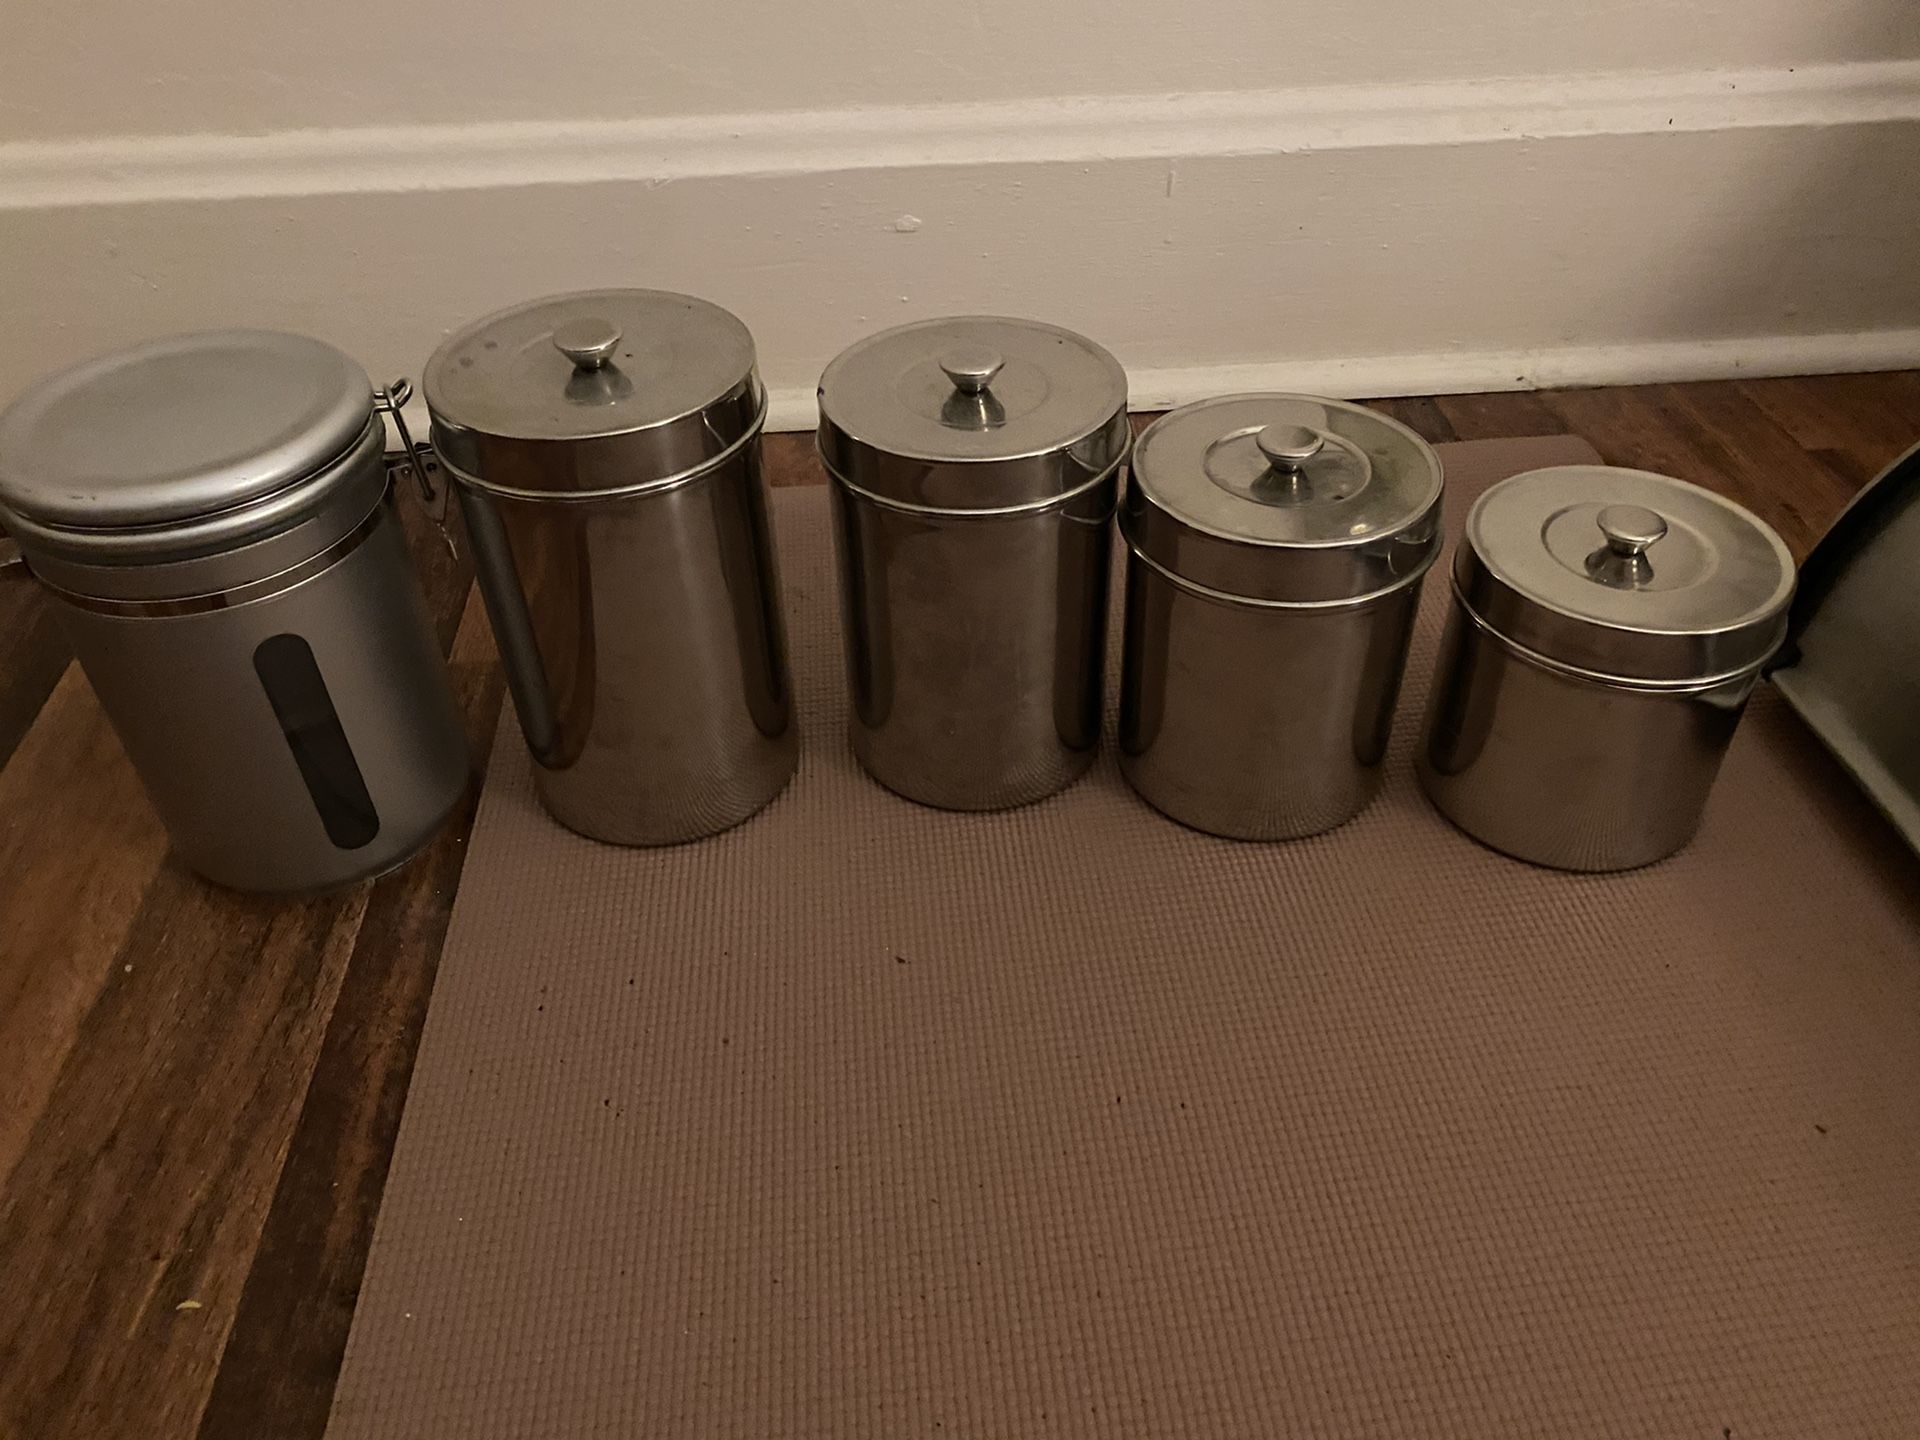 Four matching stainless steel storage containers